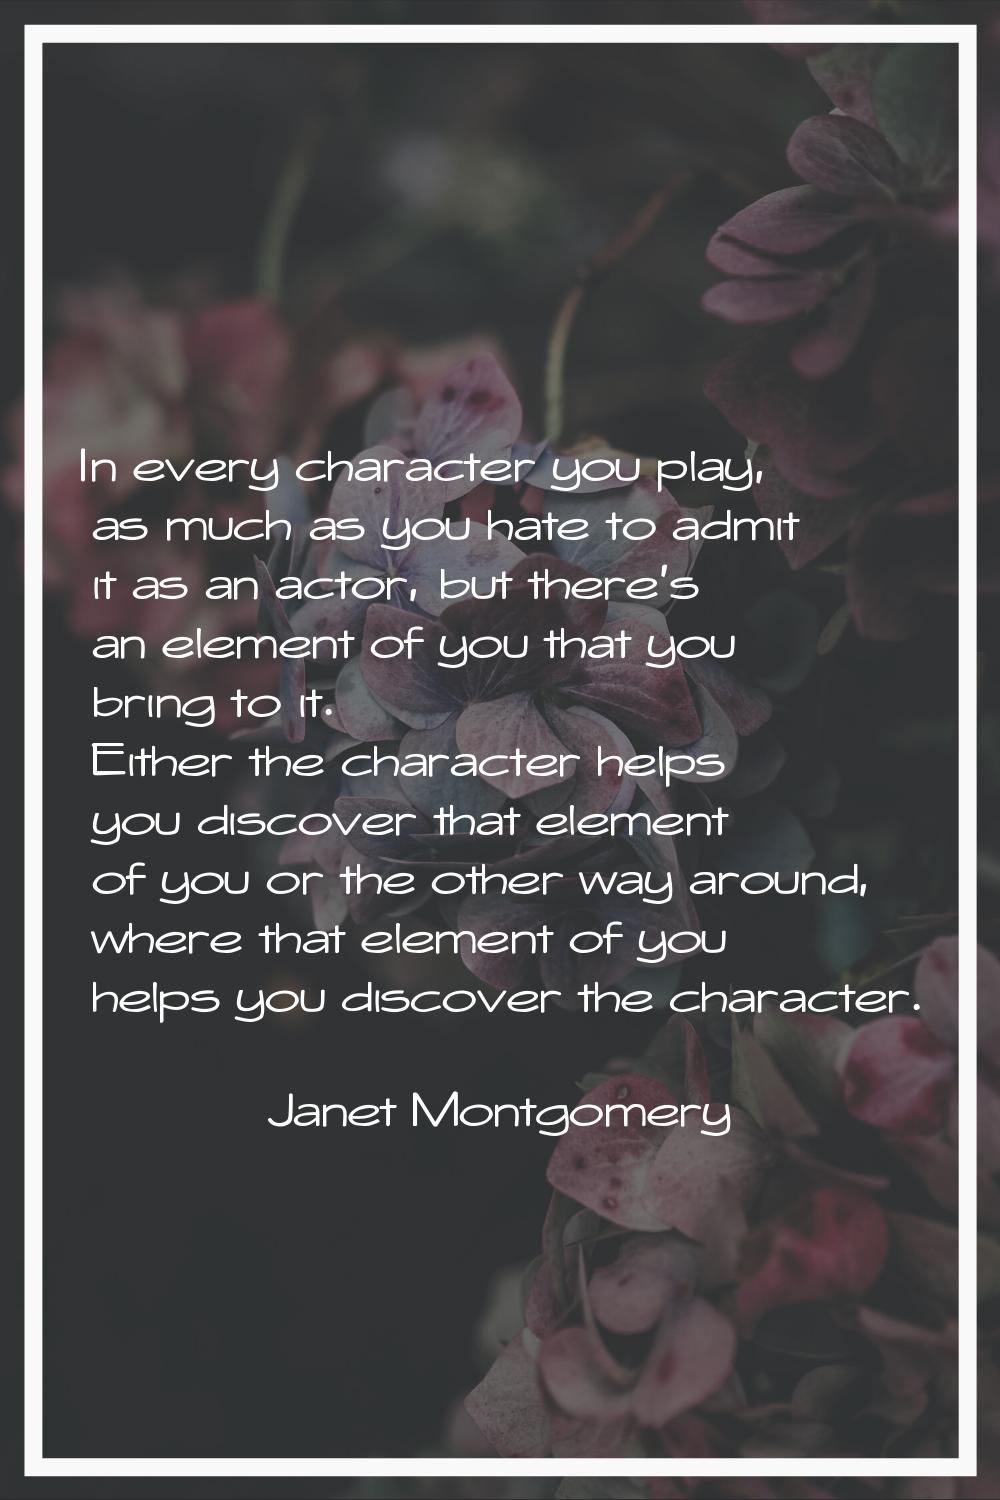 In every character you play, as much as you hate to admit it as an actor, but there's an element of